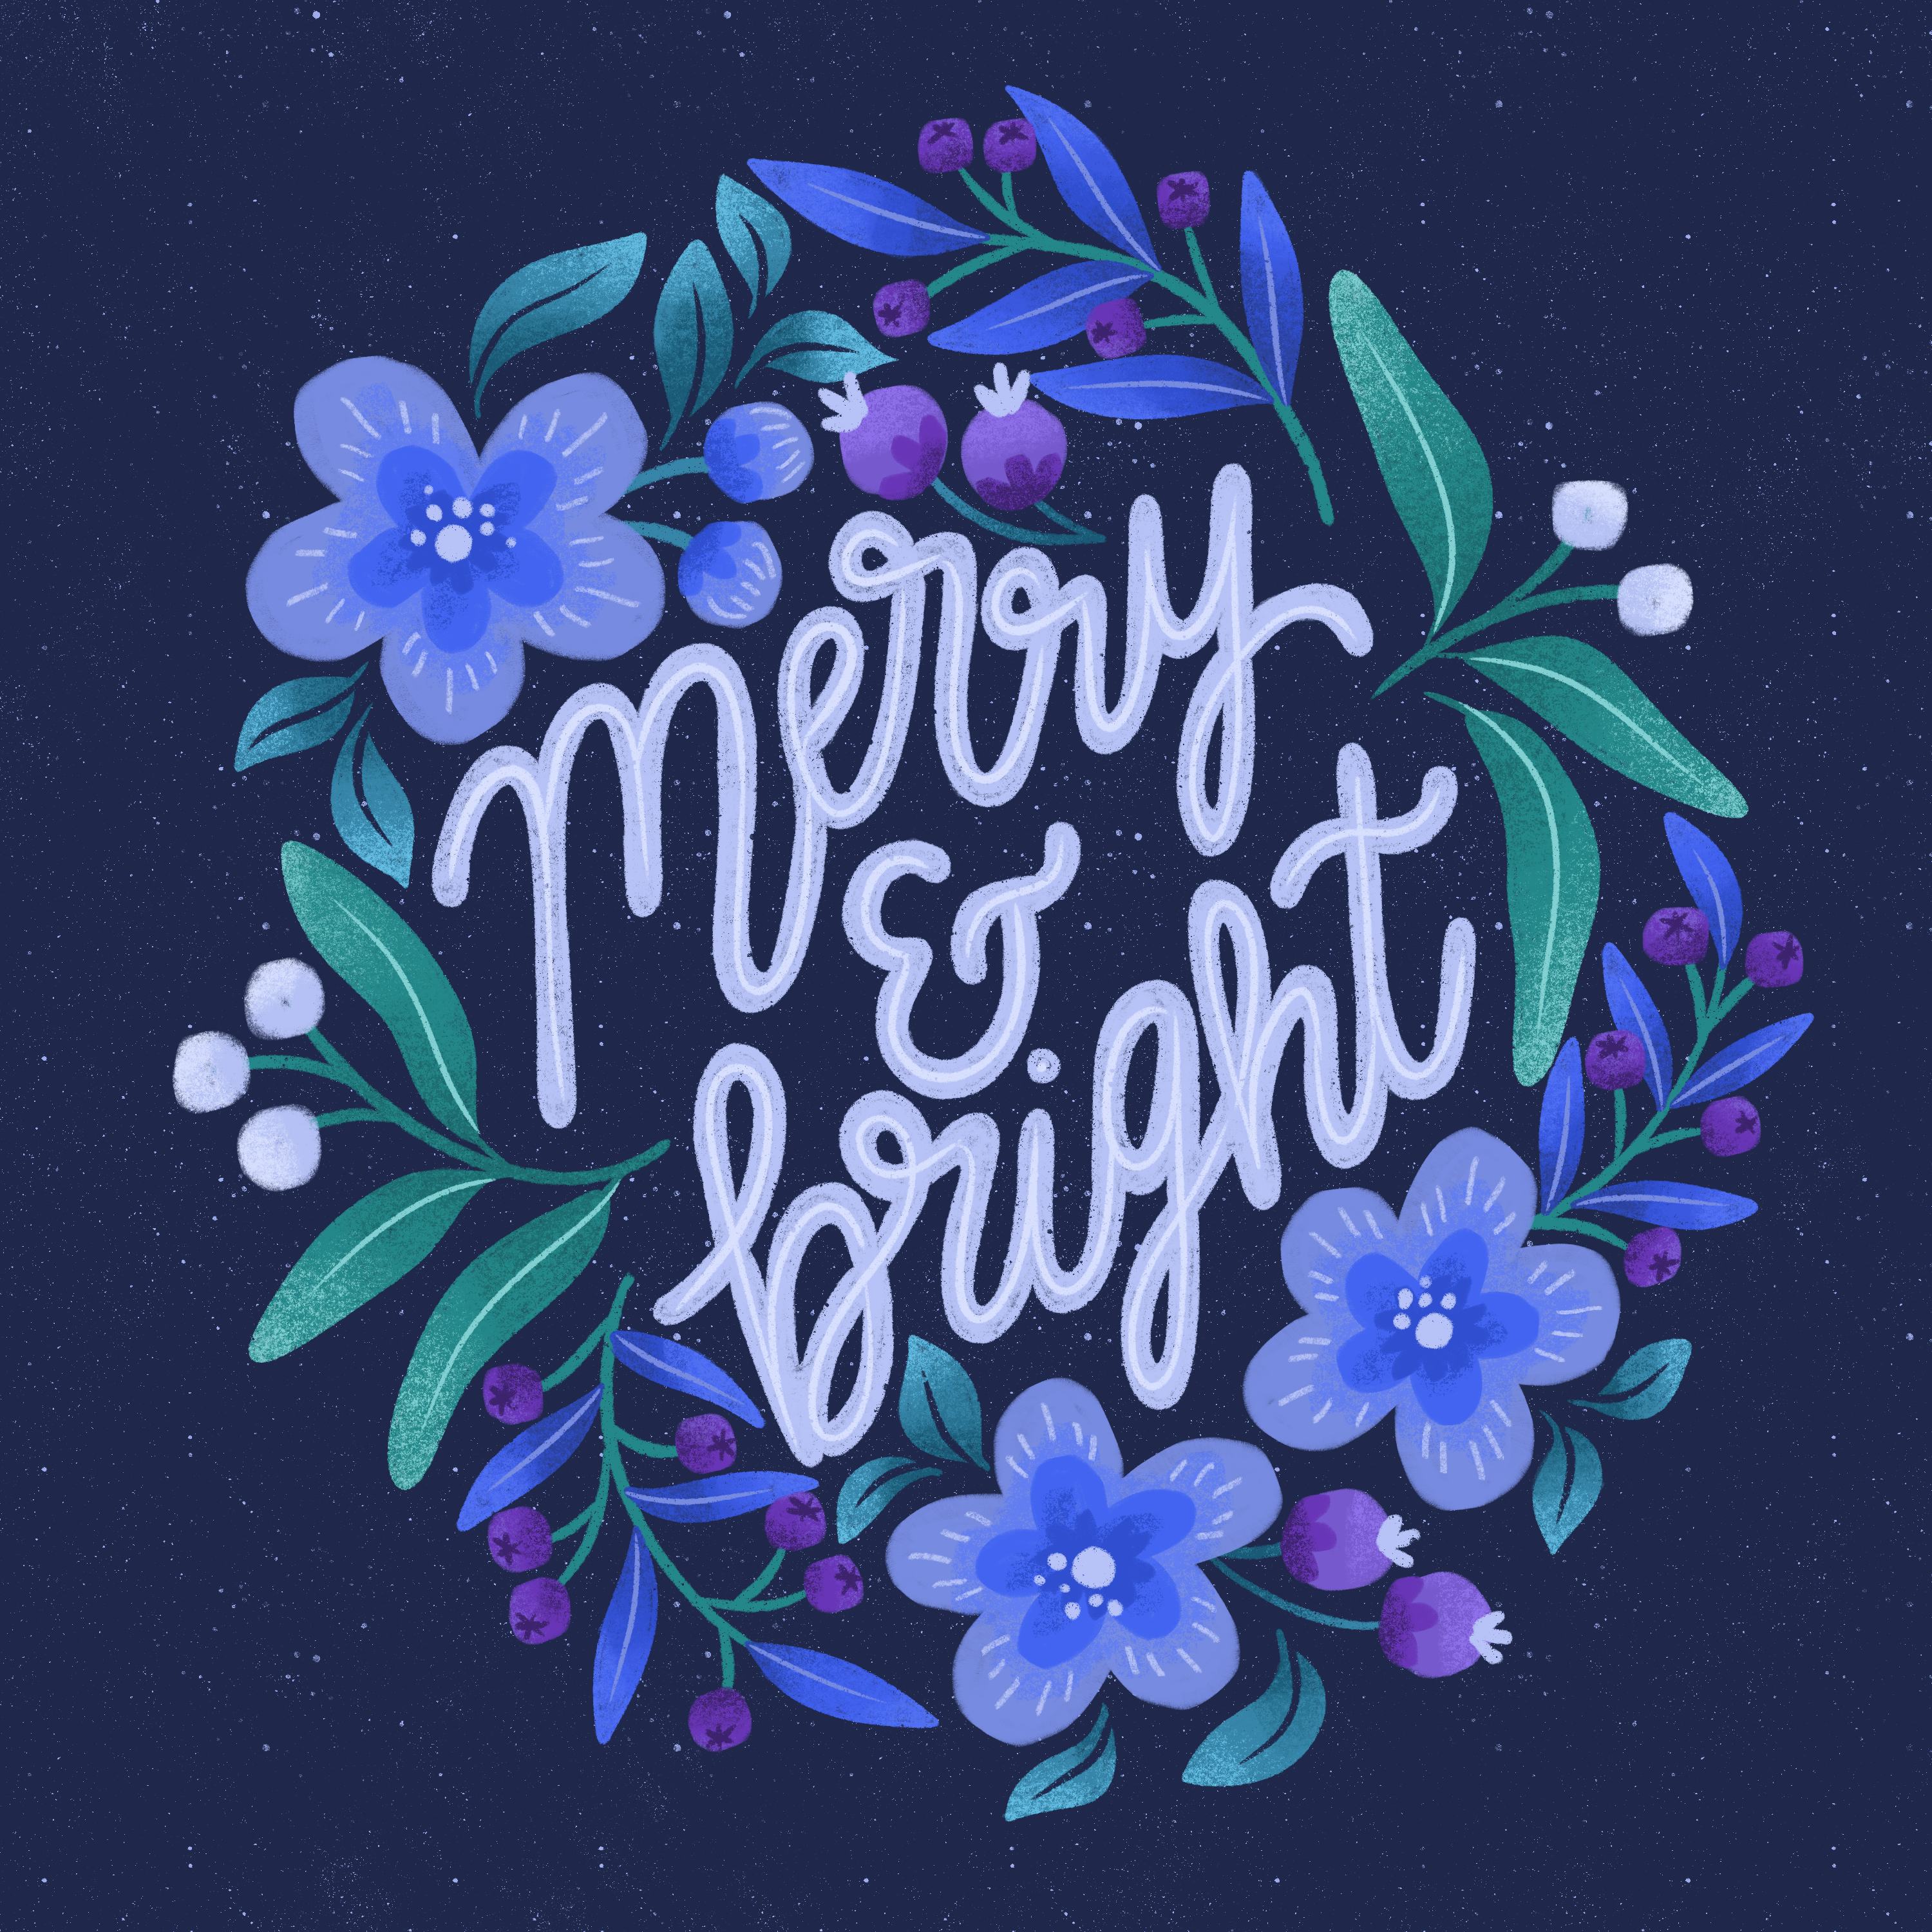 "Merry and Bright" surrounded by illustrated purple and blue flowers